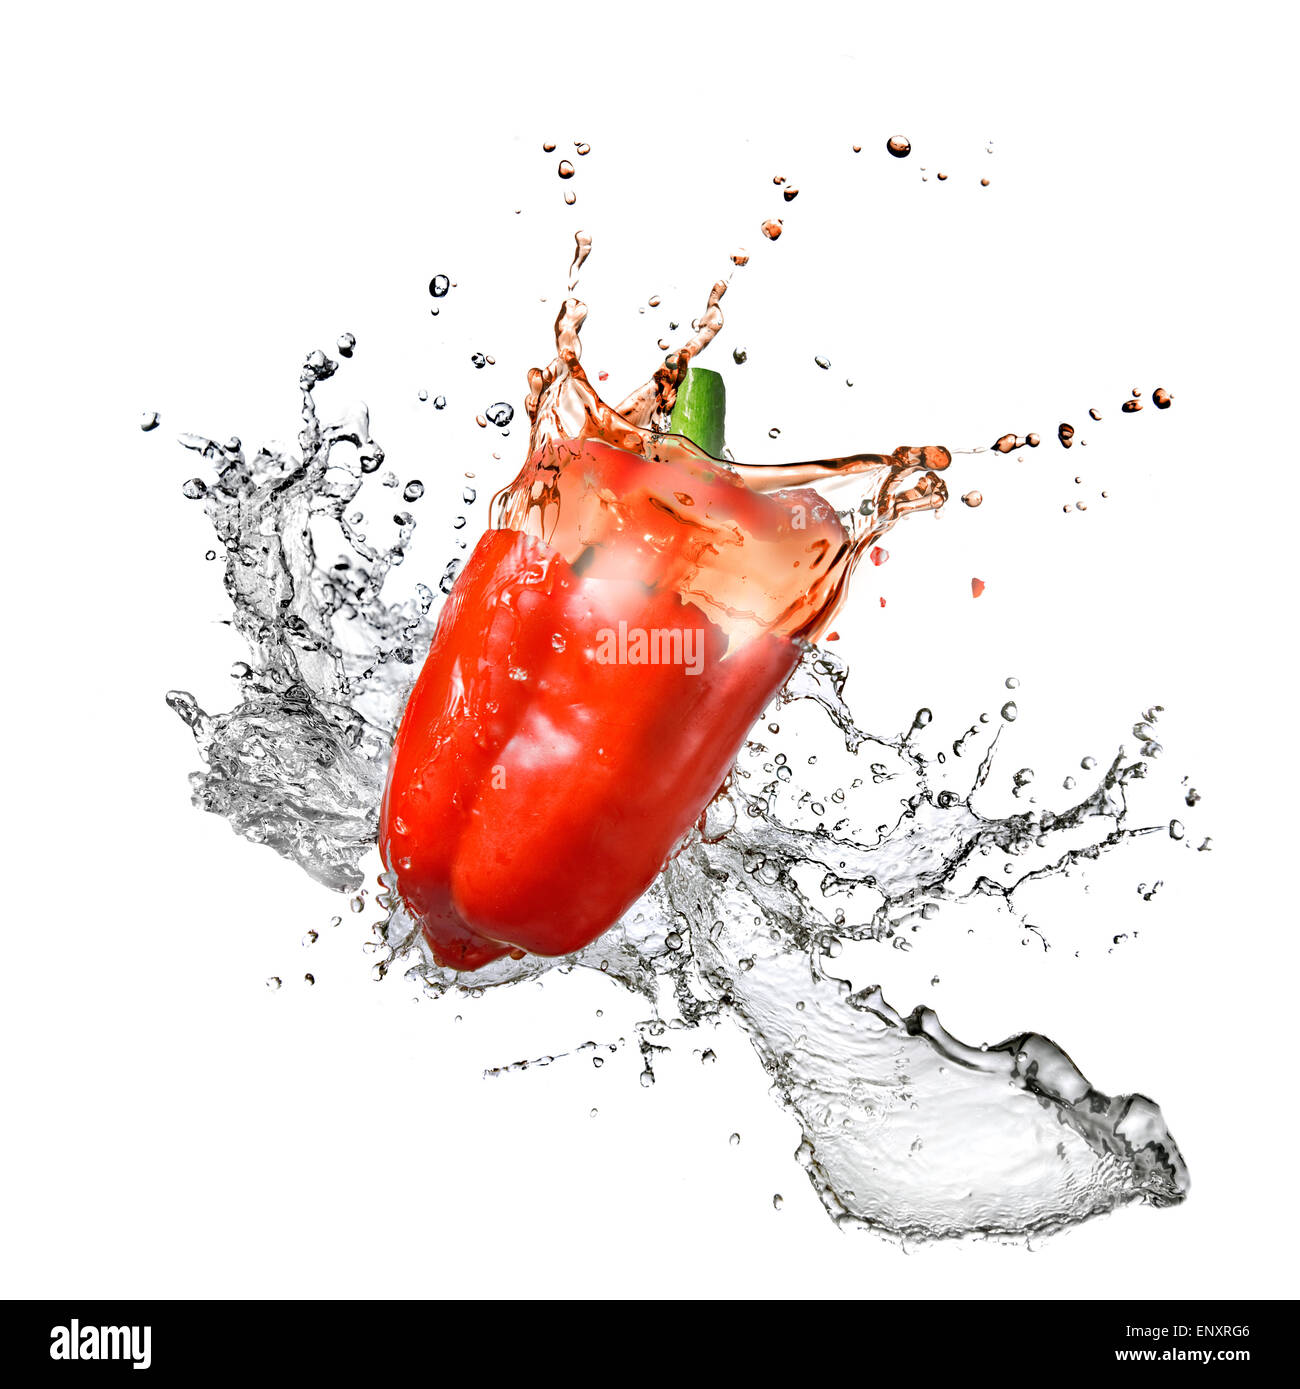 fresh water splash on red pepper isolated on white Stock Photo